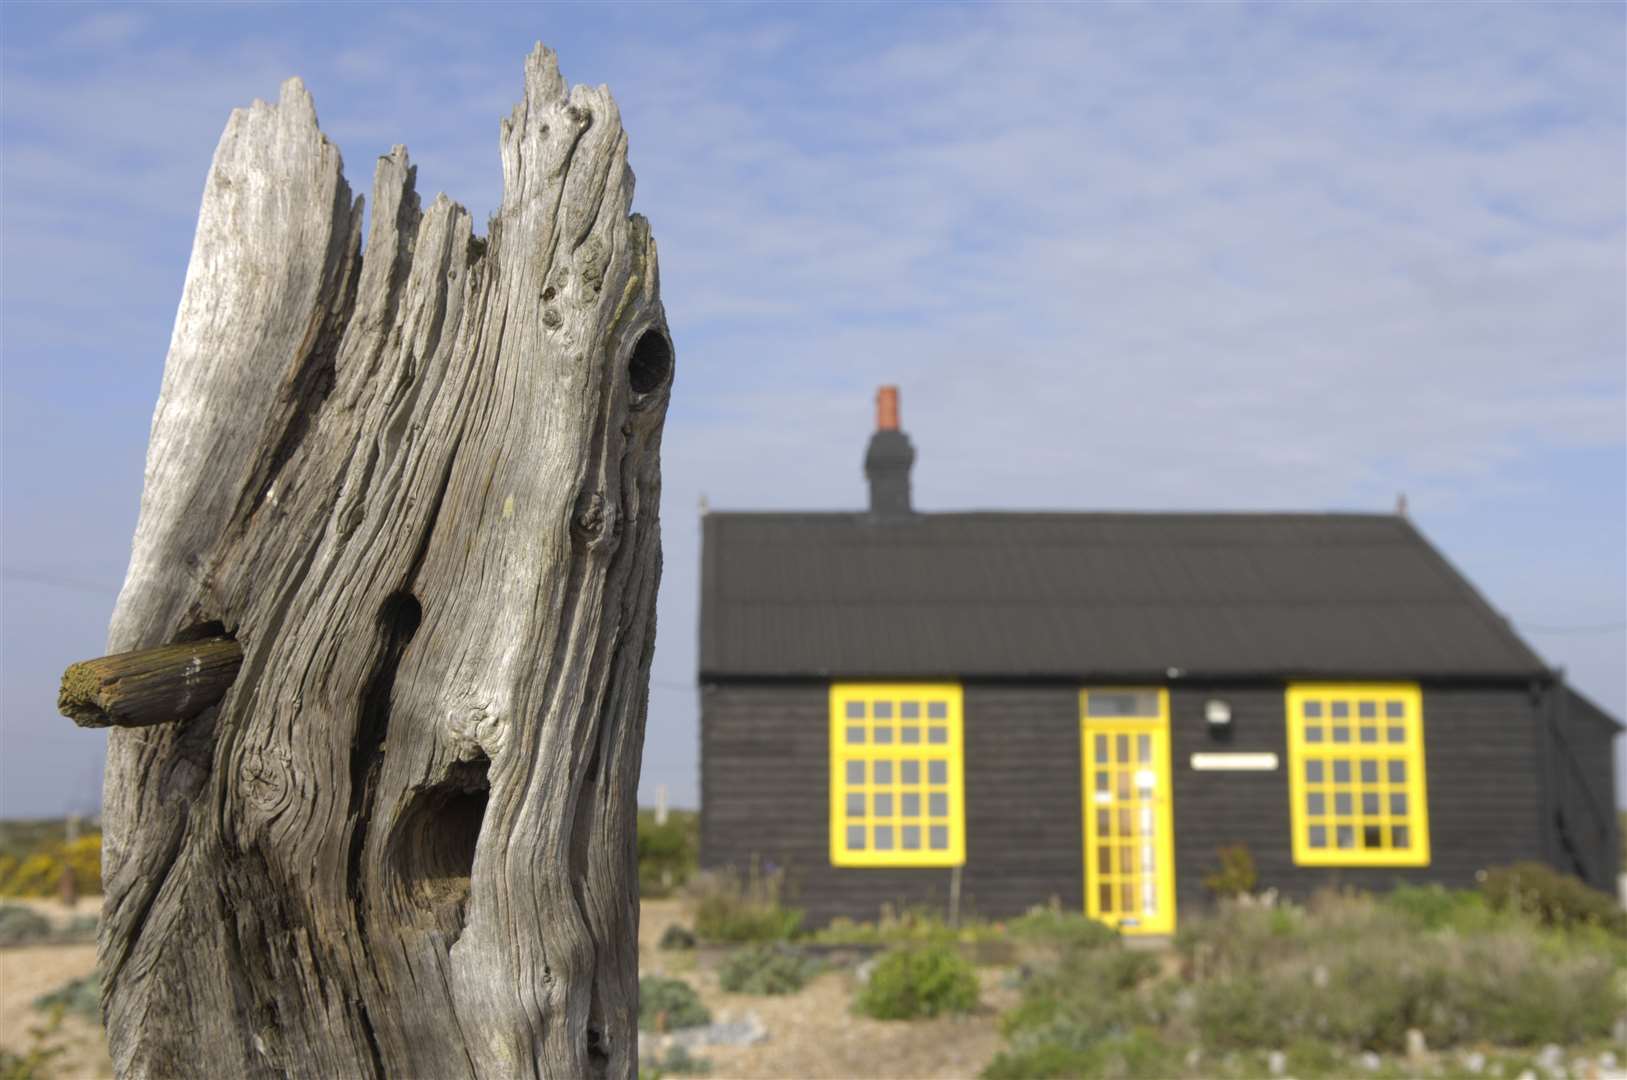 Prospect House in Dungeness